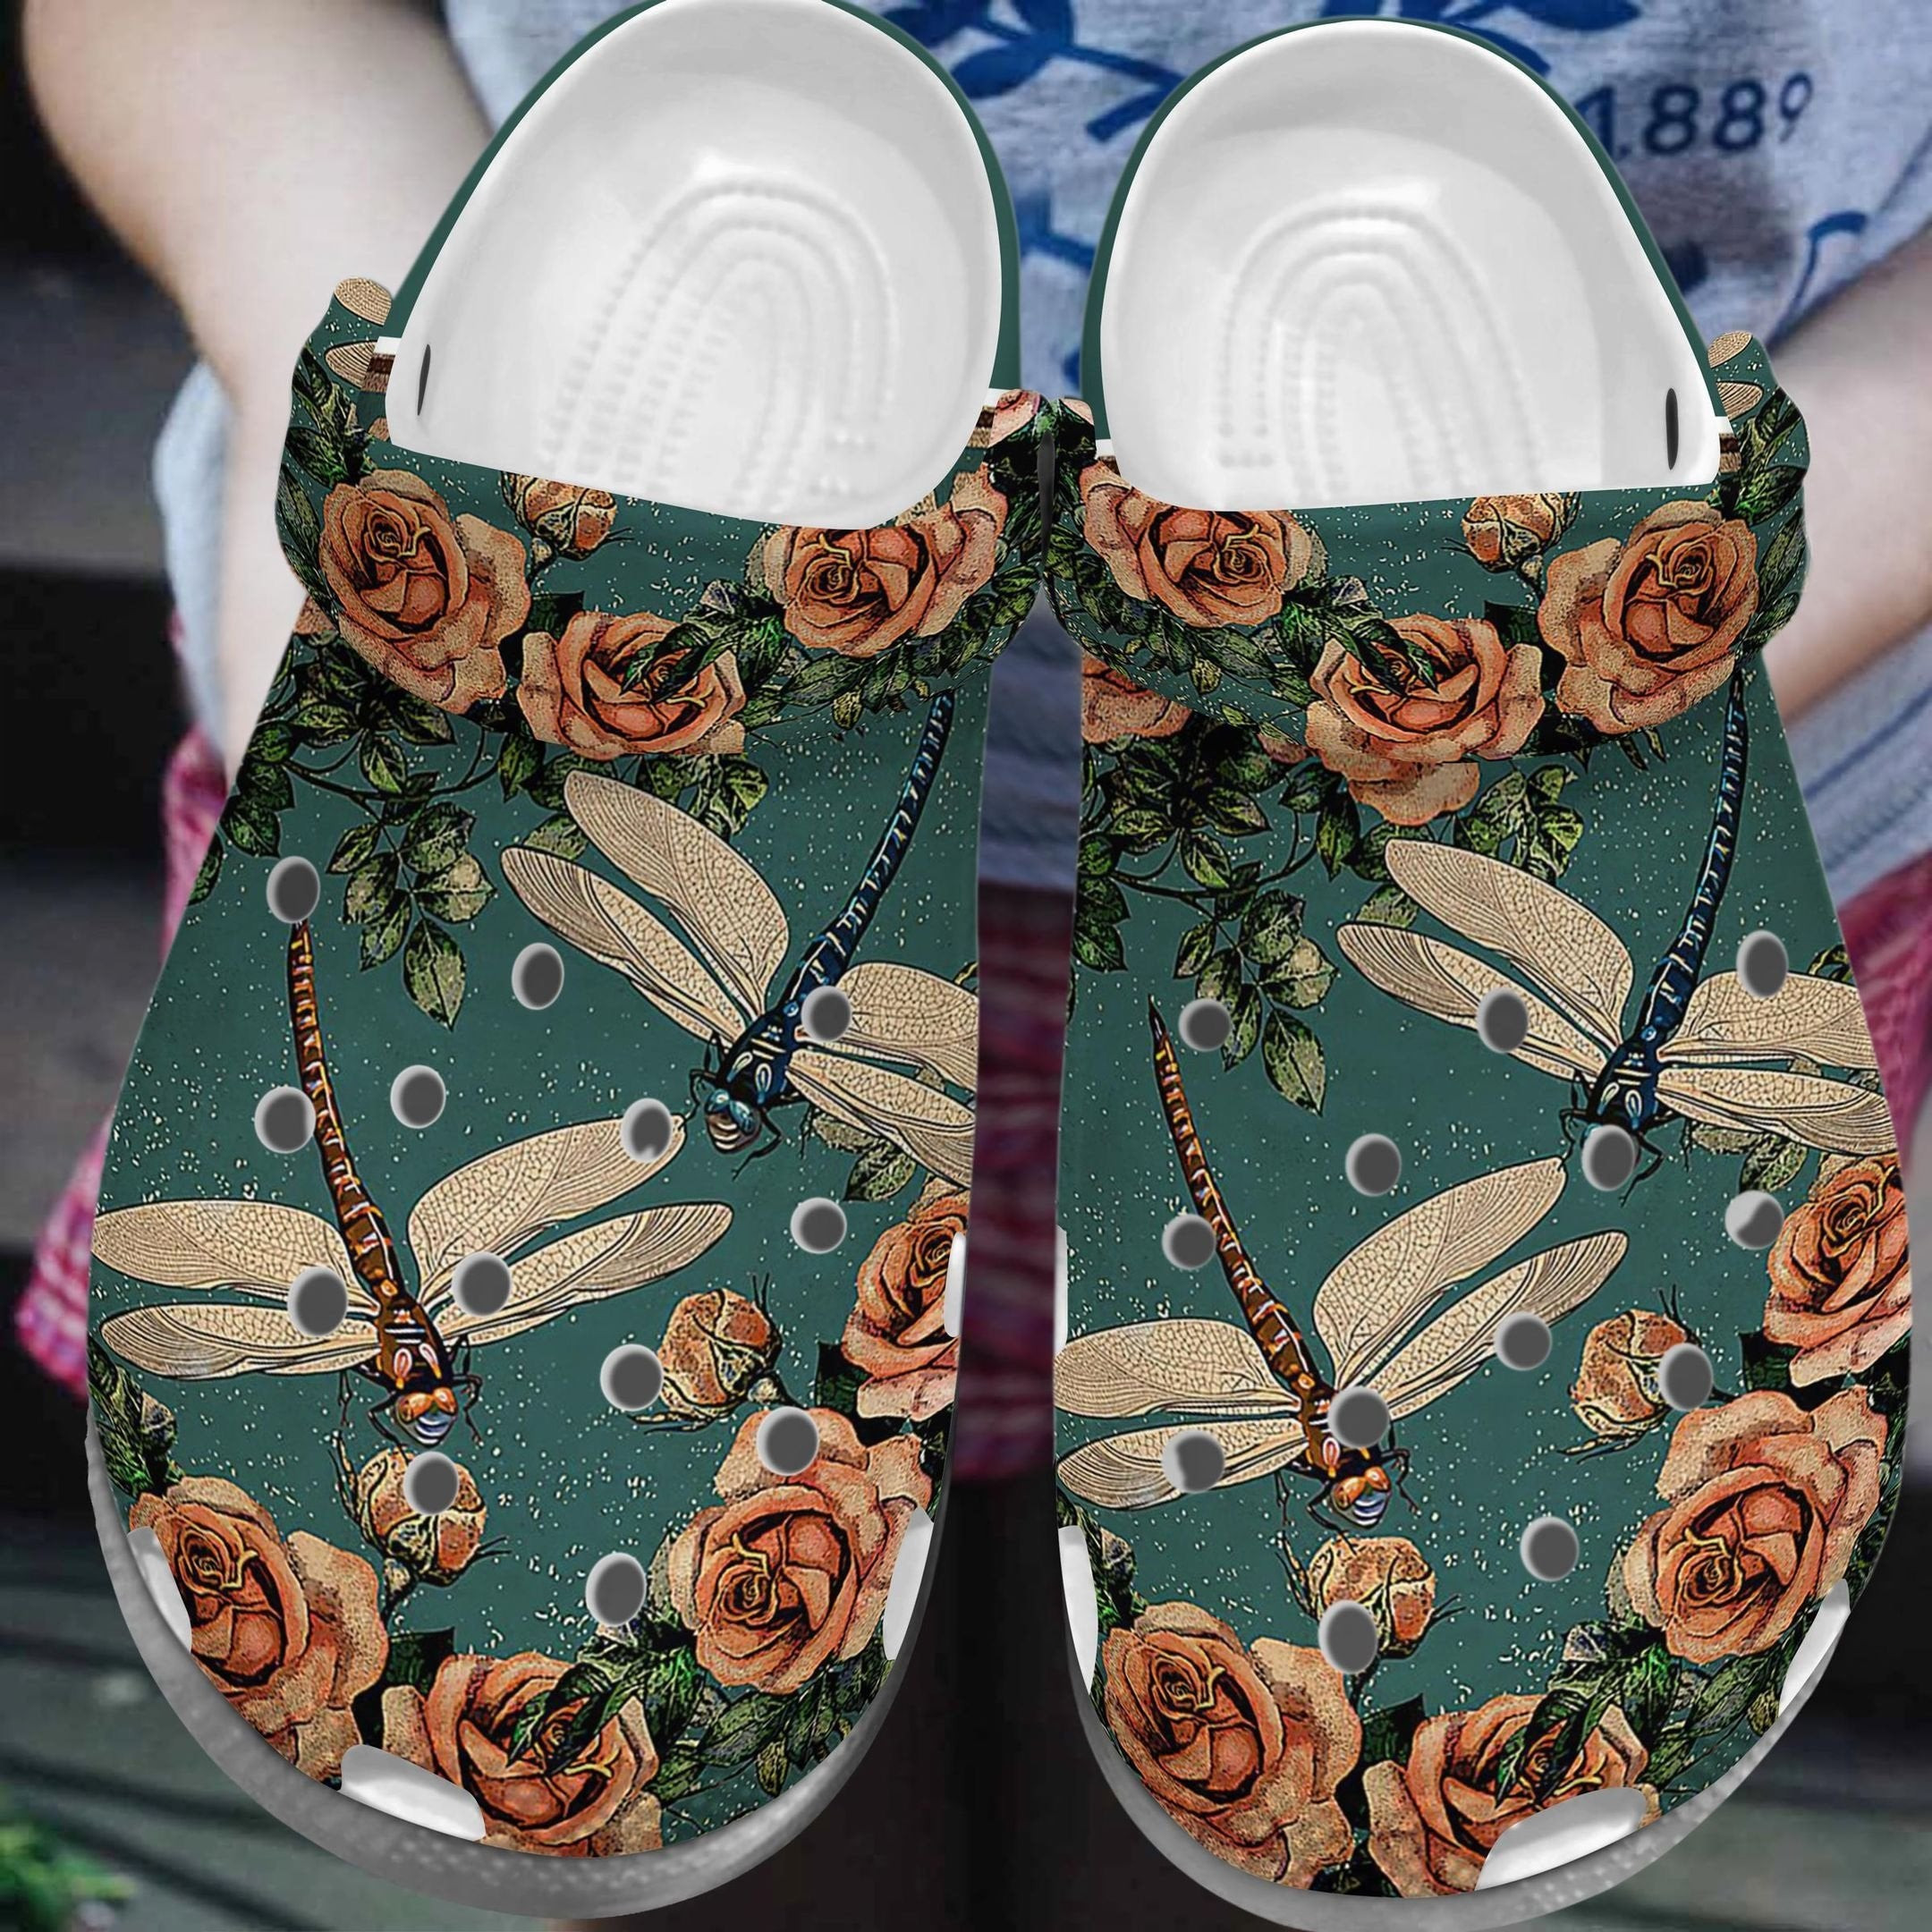 Vintage Dragonfly Roses Crocs Shoes For Women - Dragonfly Flower Croc Clogs Shoes Gift Birthday Girl